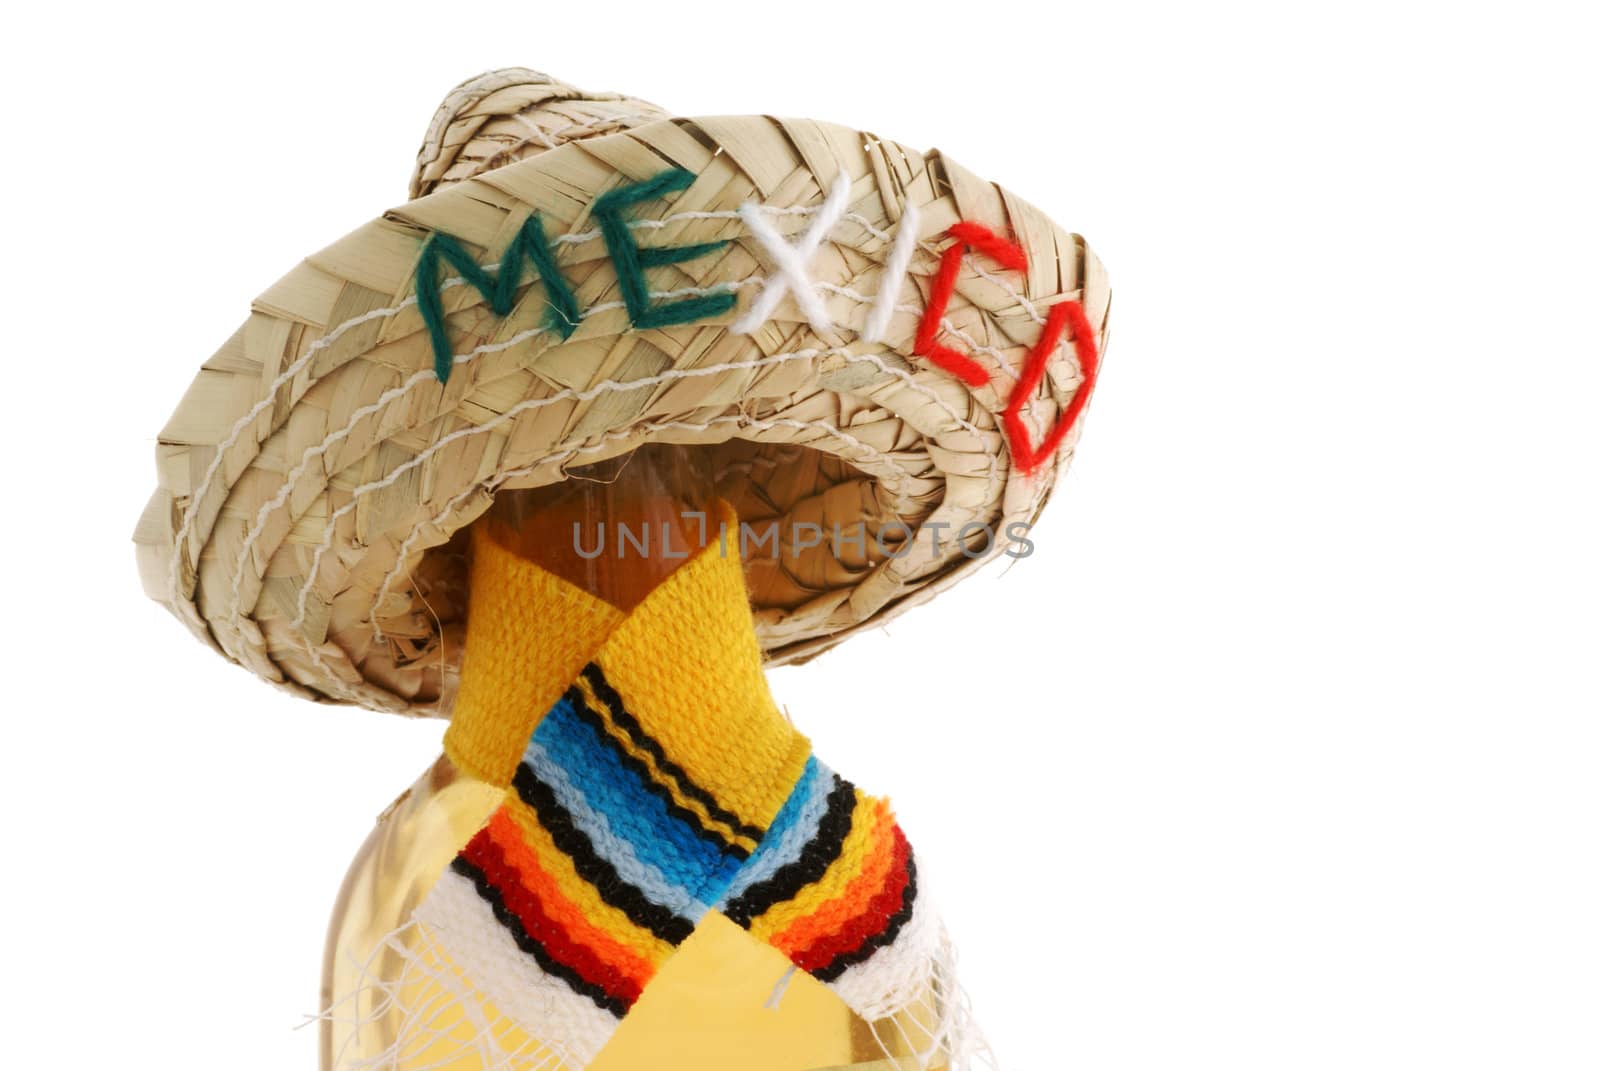 Bottle with shawl and Mexico hat, isolated on white.